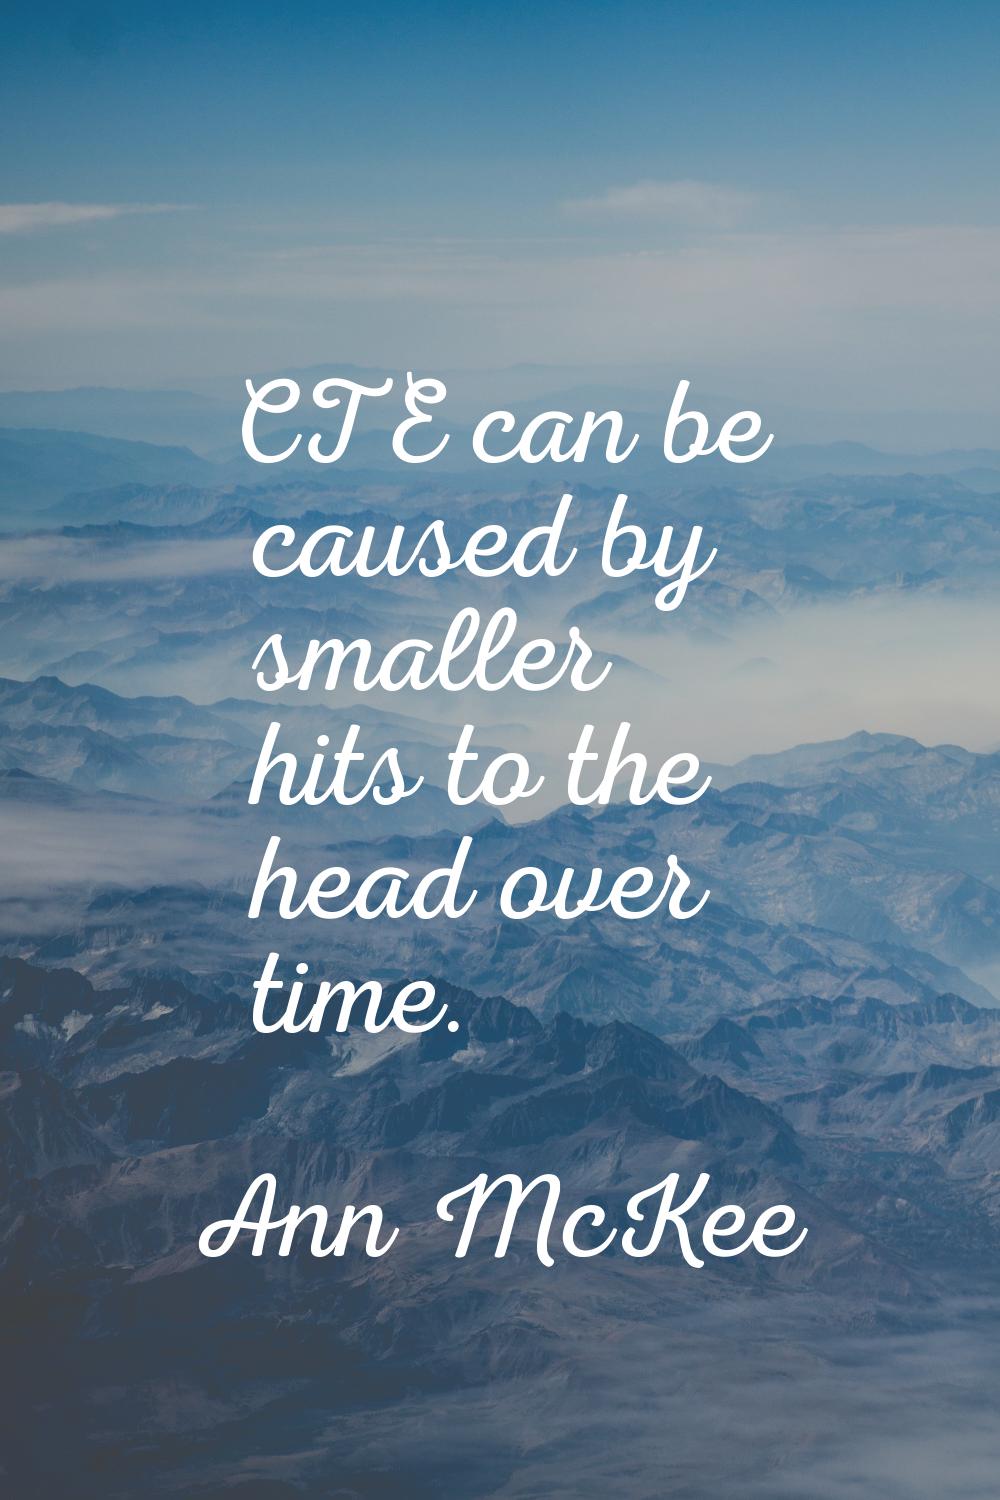 CTE can be caused by smaller hits to the head over time.